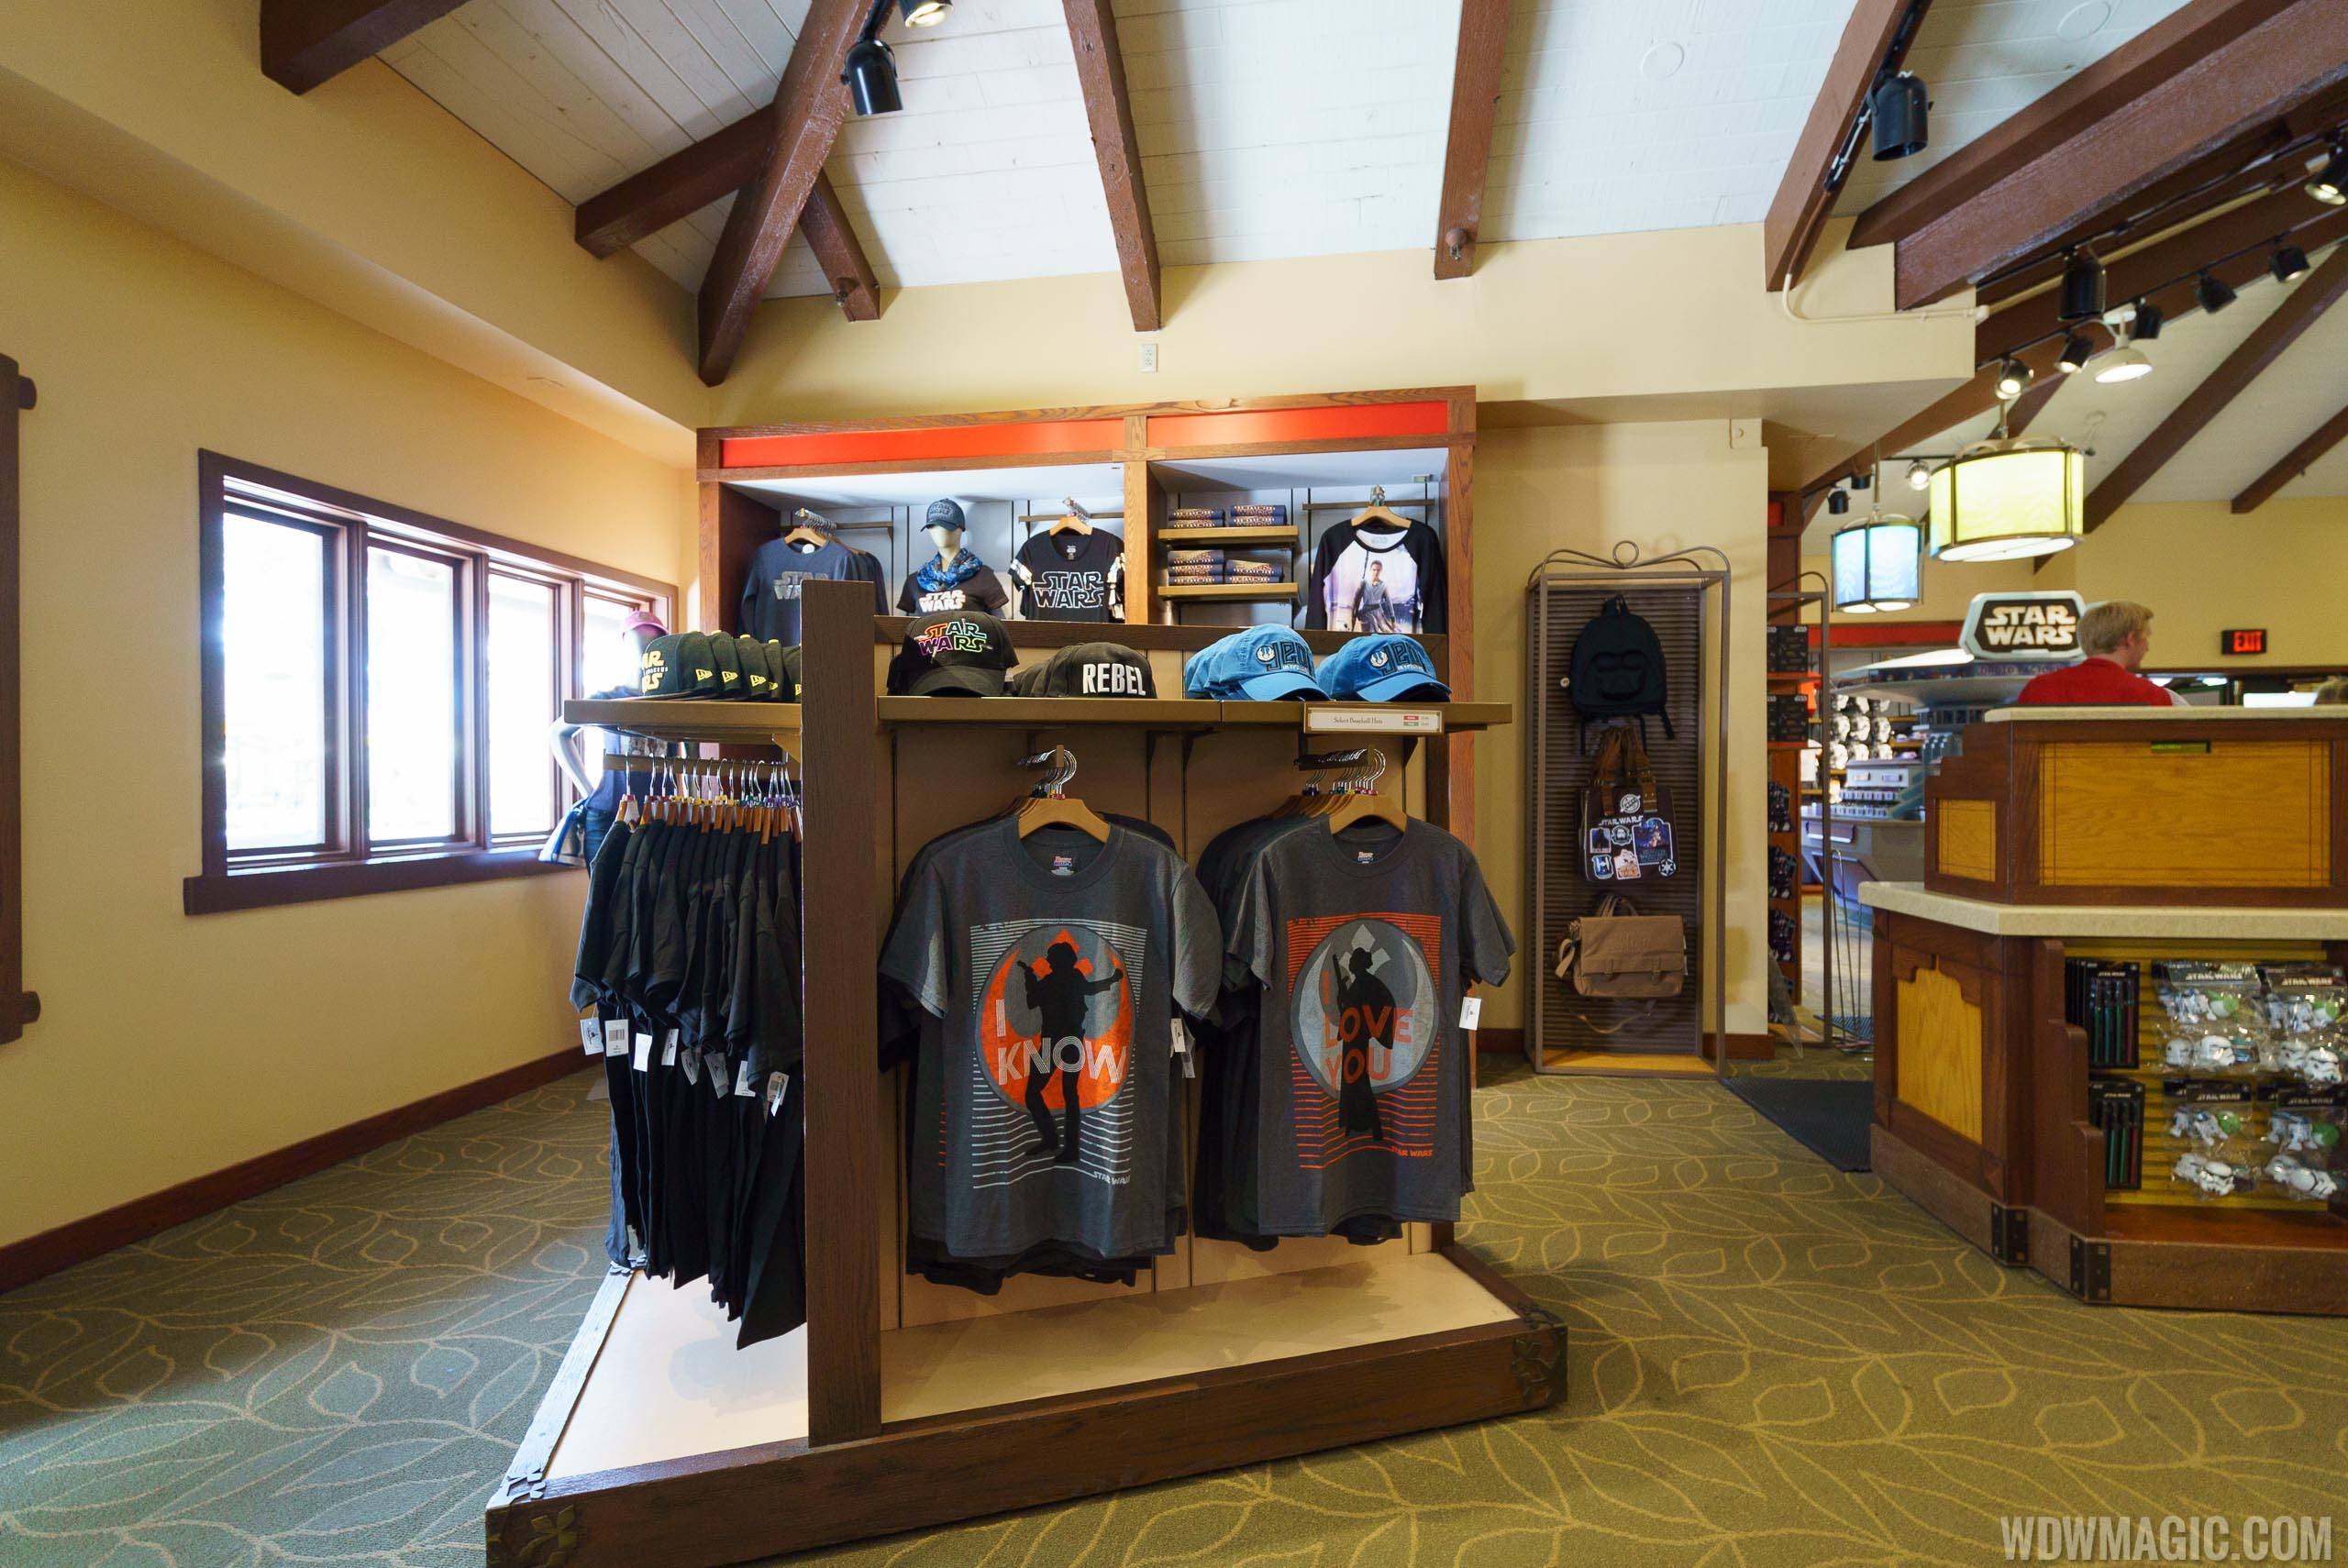 Star Wars Trading Post overview